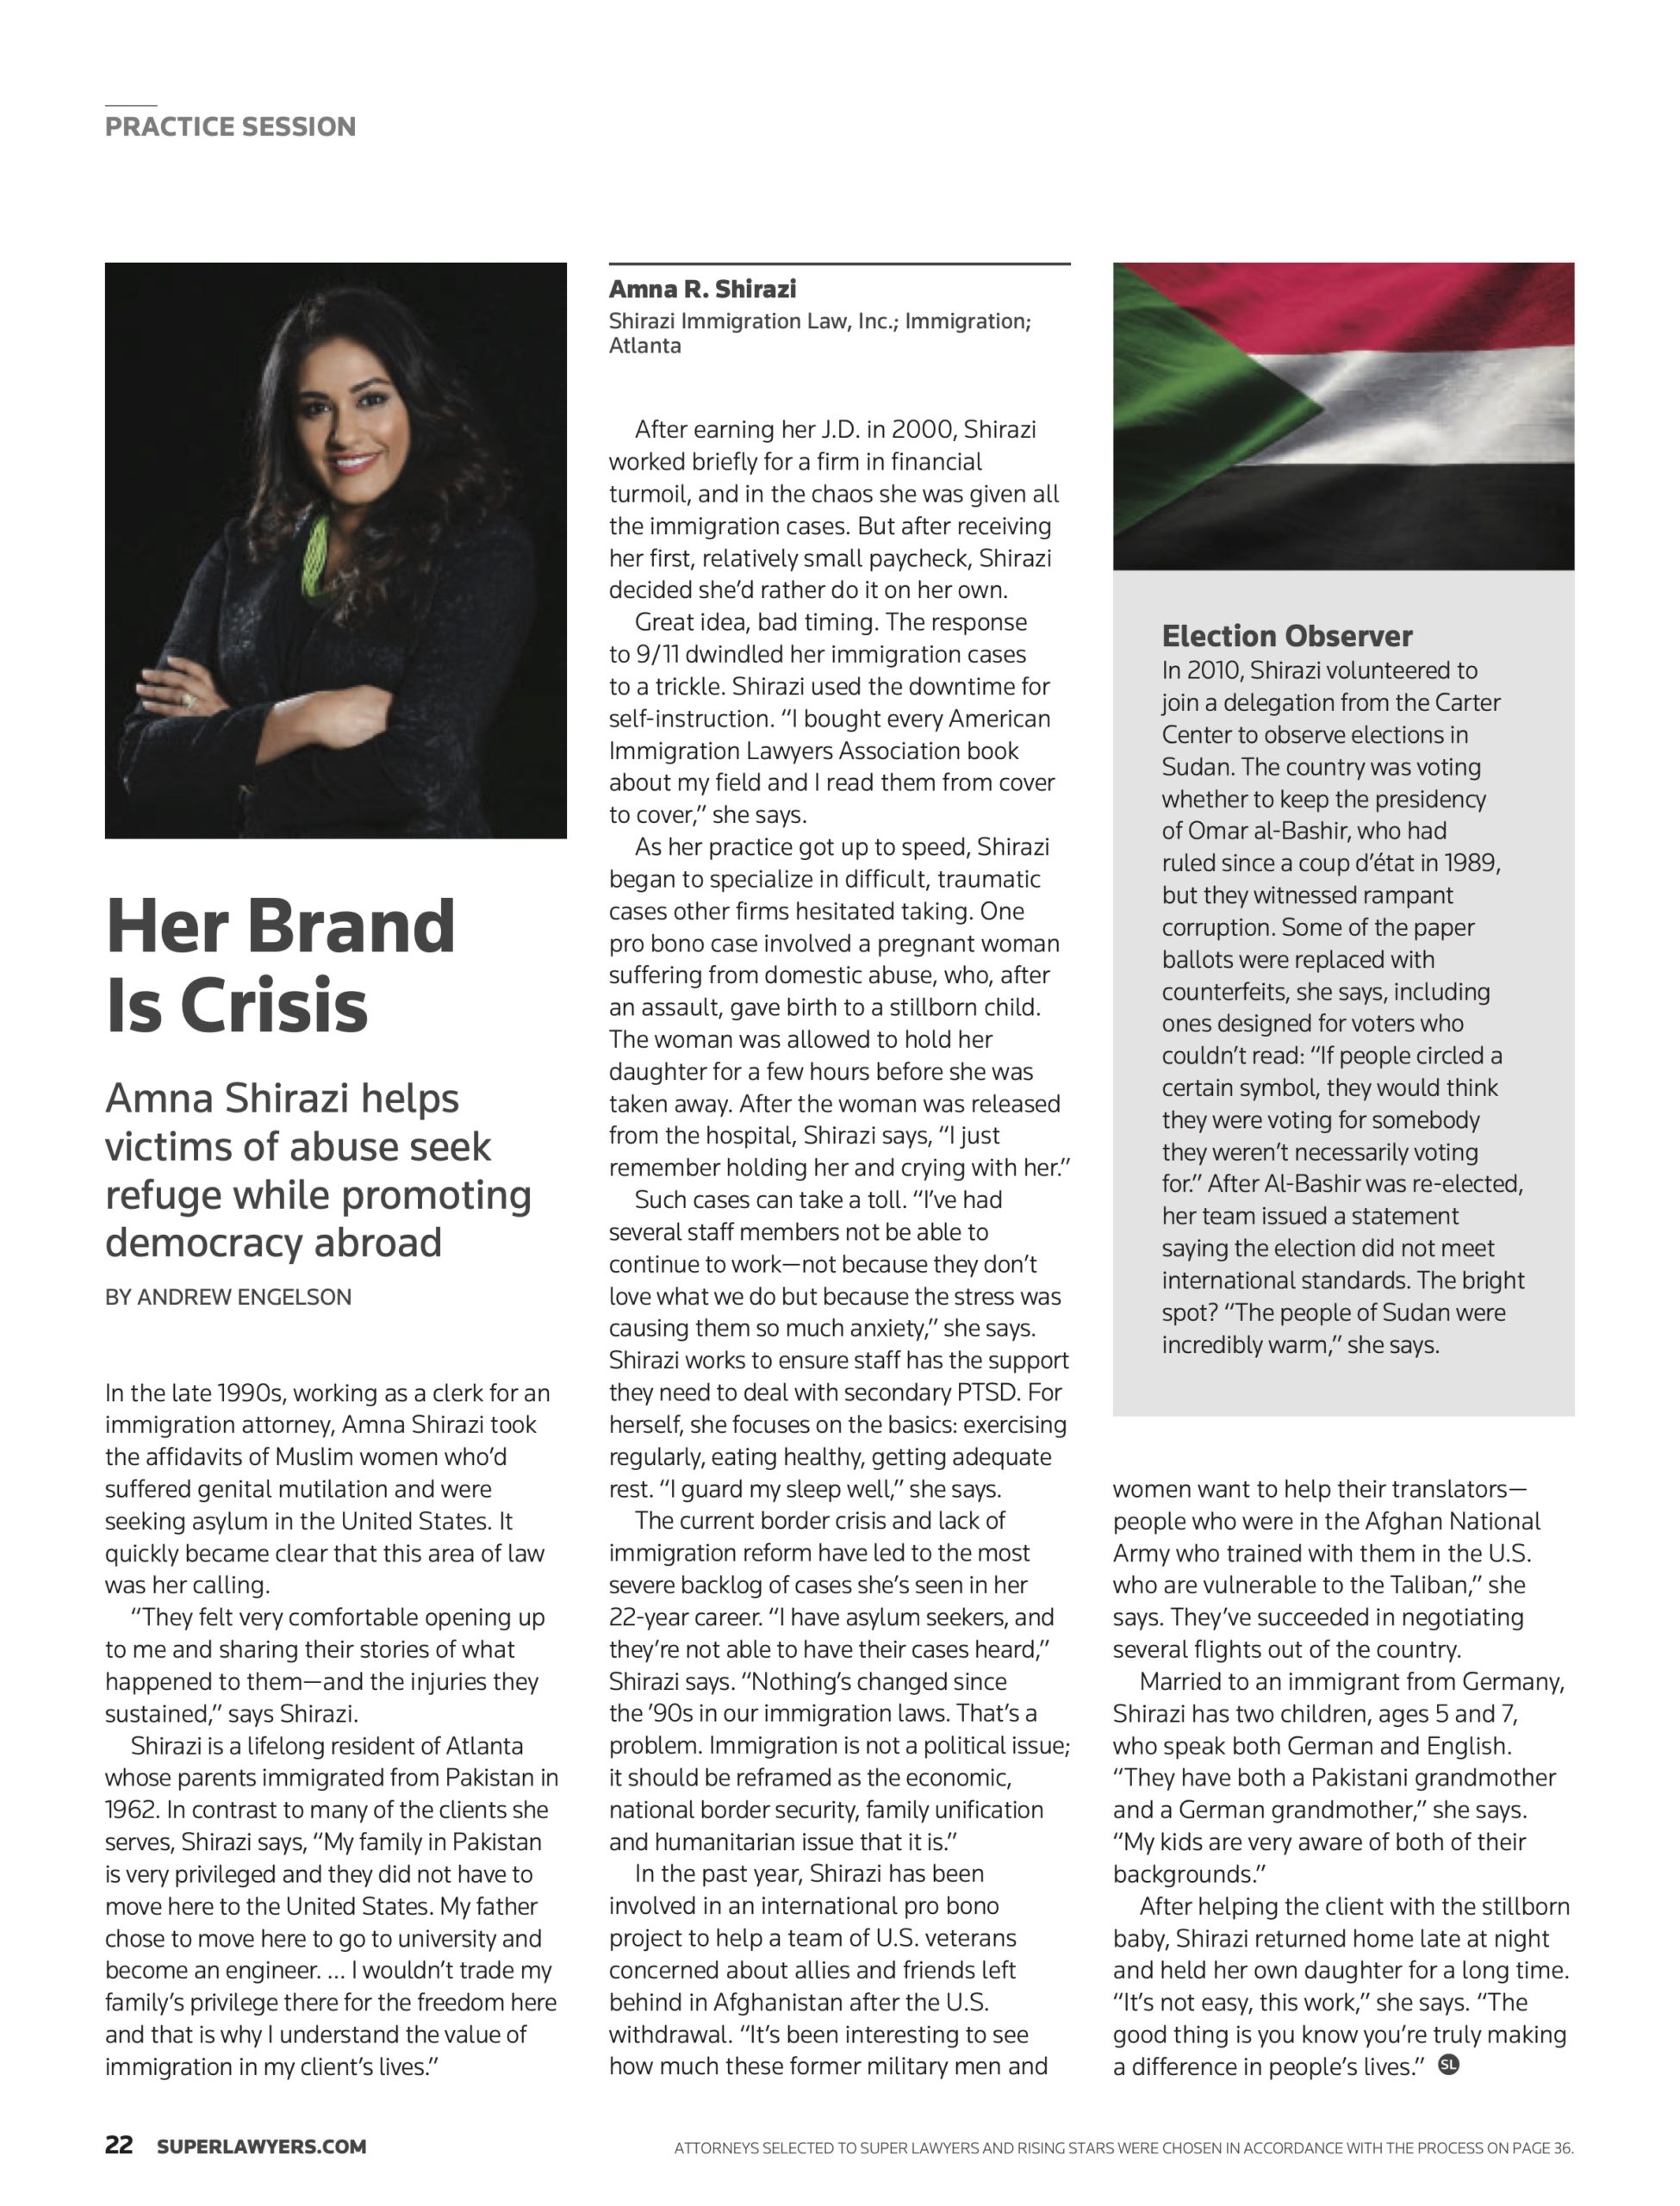 Amna Shirazi, Of Counsel Garvish Immigration Law Group, Featured Story in 2023 Georgia Super Lawyers Magazine discussing how she helps victims of abuse through immigration services.